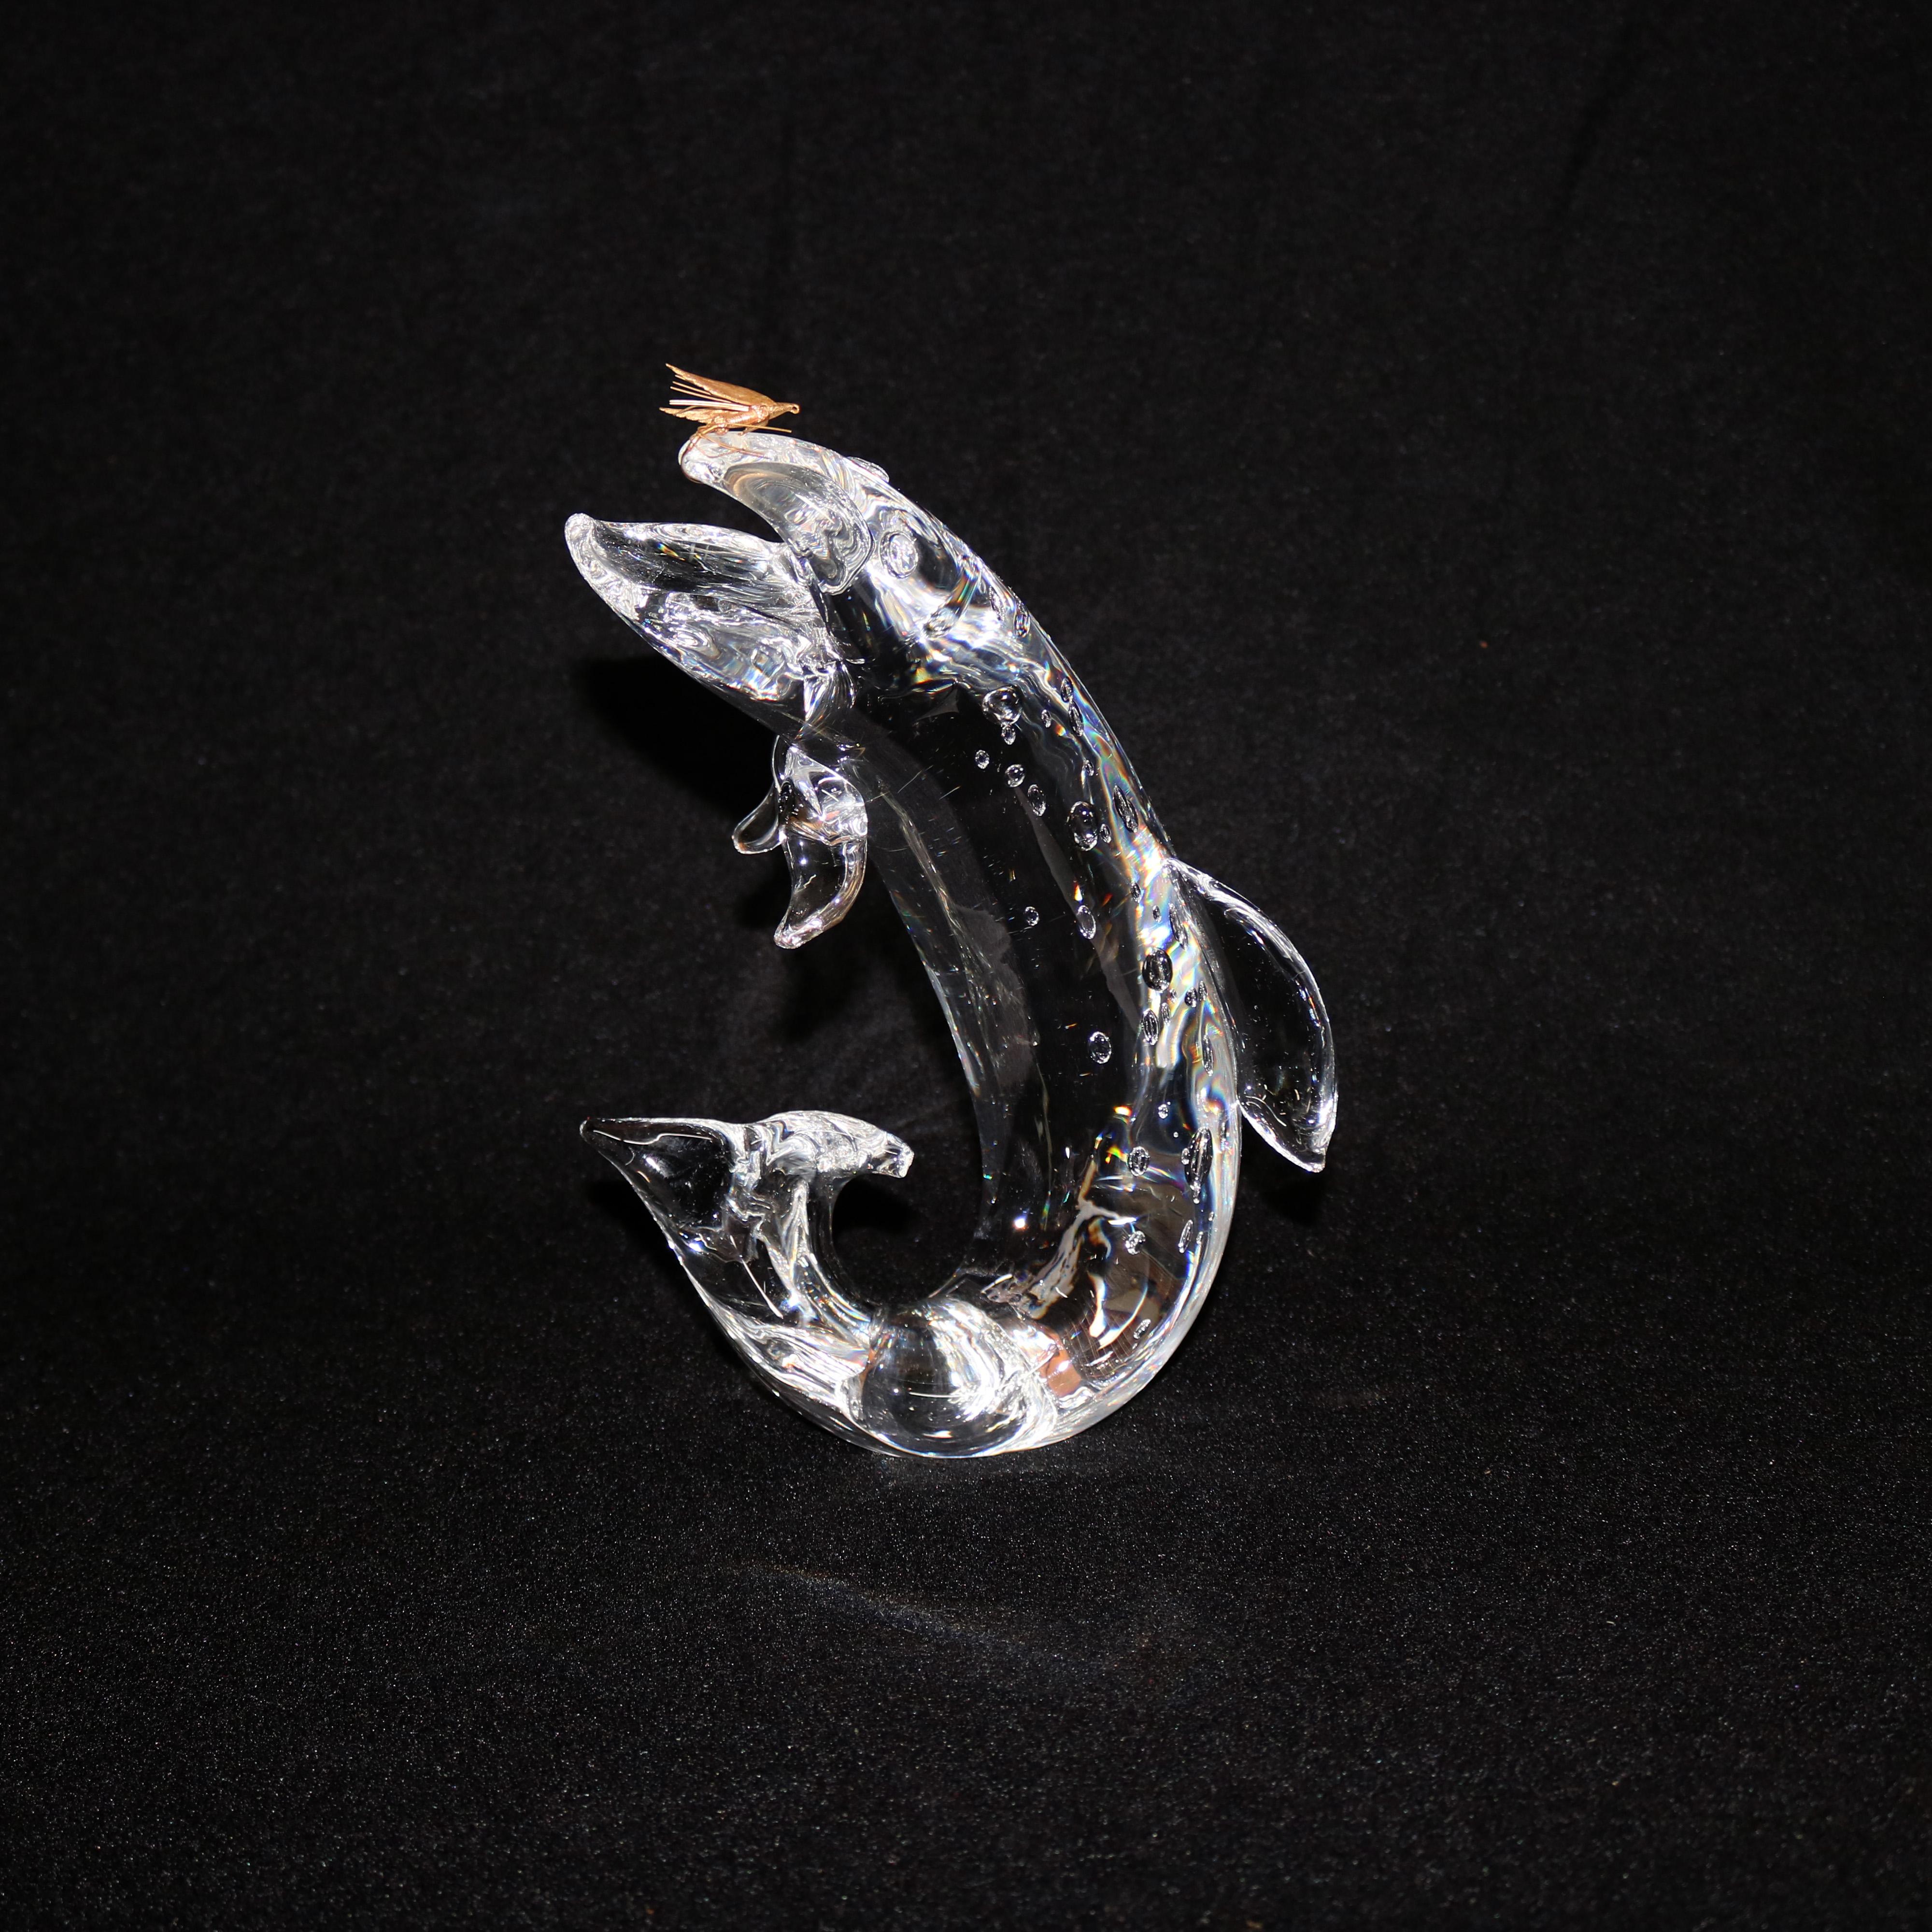 Steuben Figurative Crystal and Gold Sculpture Paperweight, Trout & Fly, Signed 3